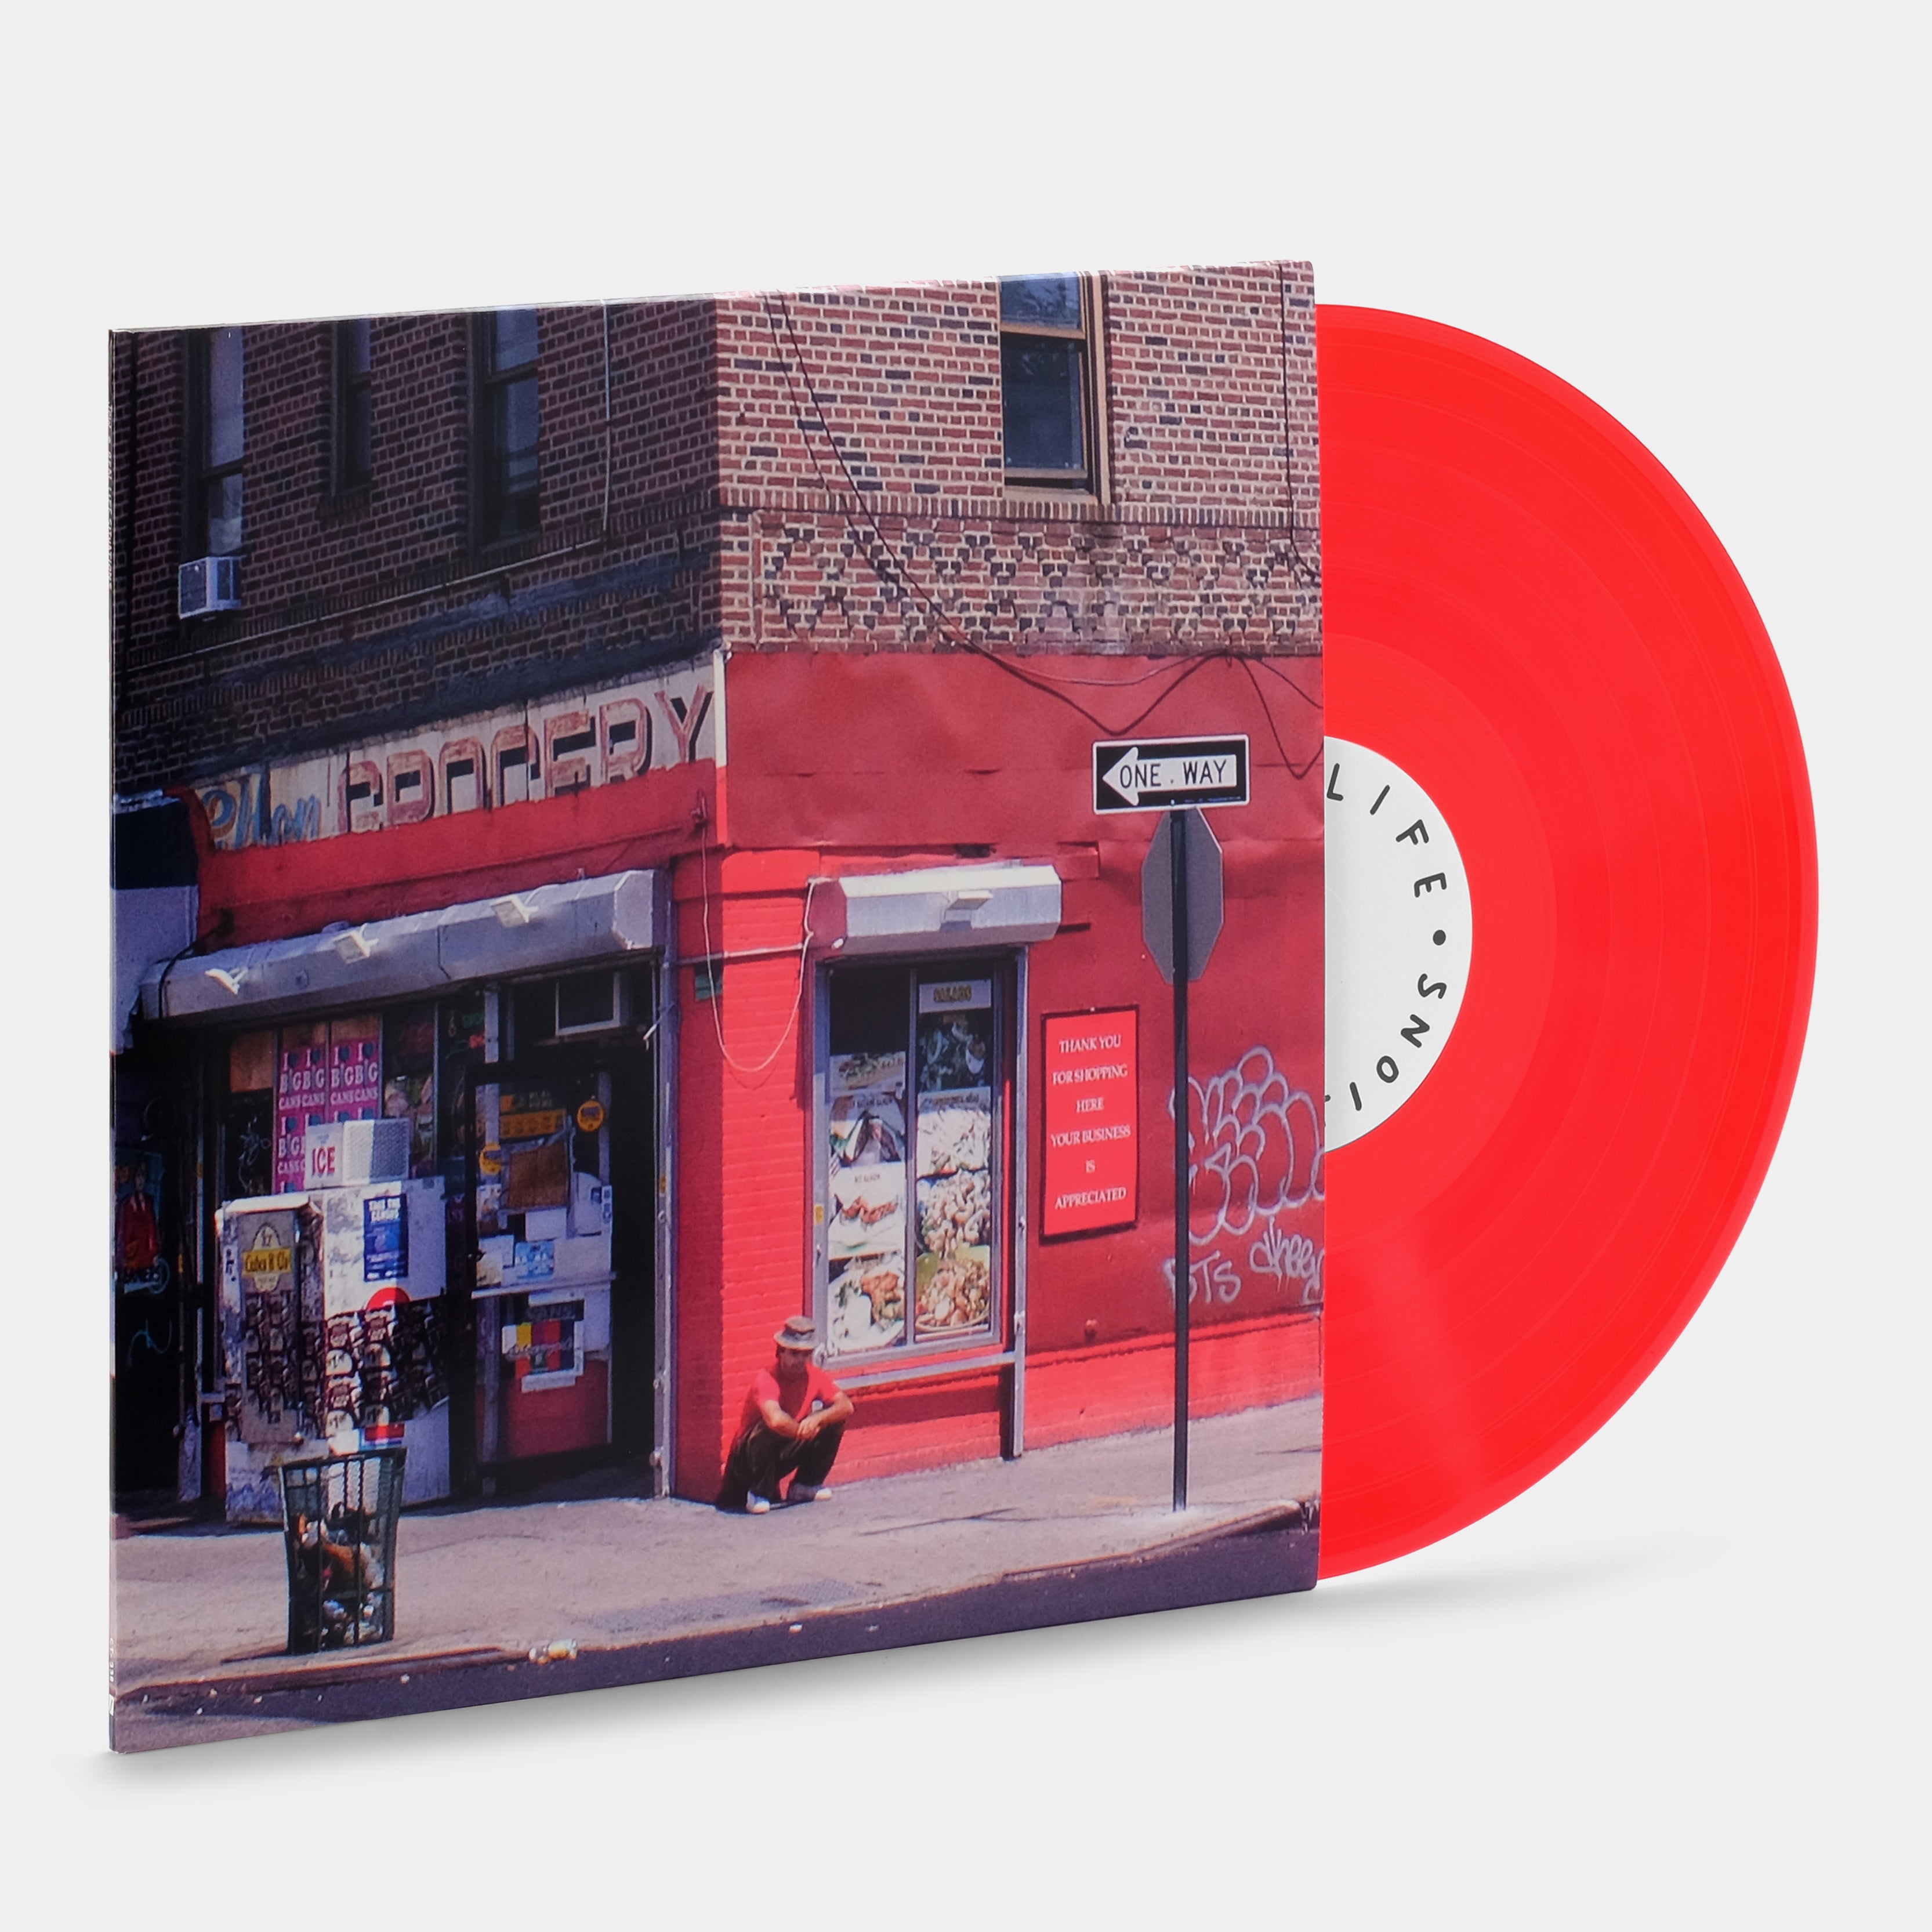 Juan Wauters - Real Life Situations LP Transparent Ruby Red Vinyl Record